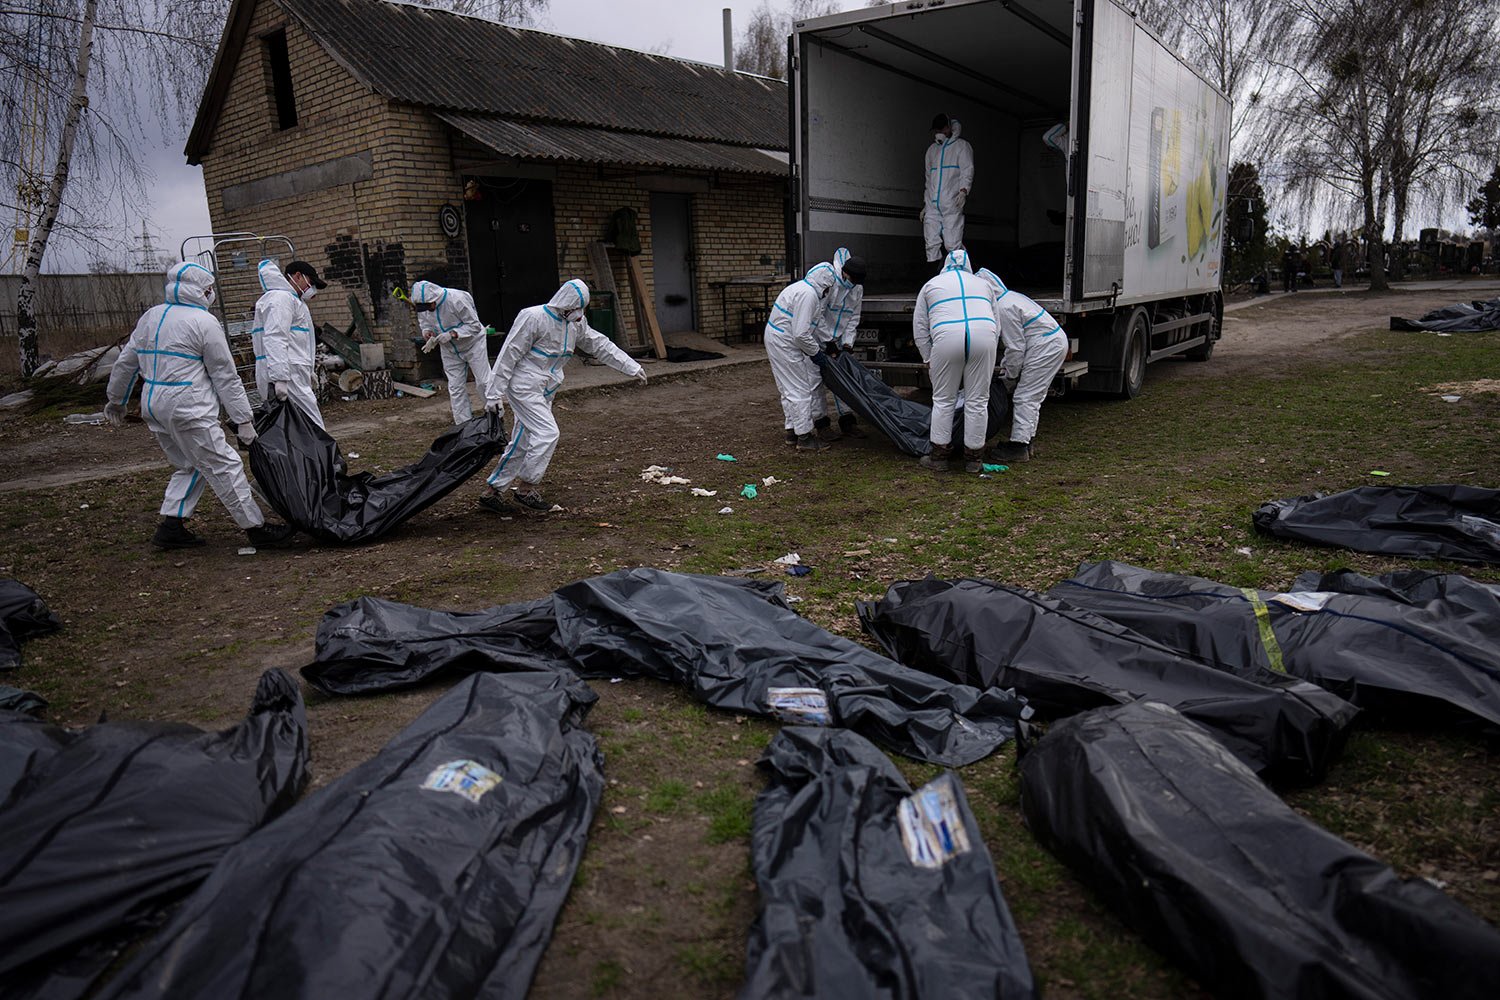  Volunteers load bodies of civilians killed in Bucha onto a truck to be taken to a morgue for investigation, on the outskirts of Kyiv, Ukraine, Tuesday, April 12, 2022. (AP Photo/Rodrigo Abd) 